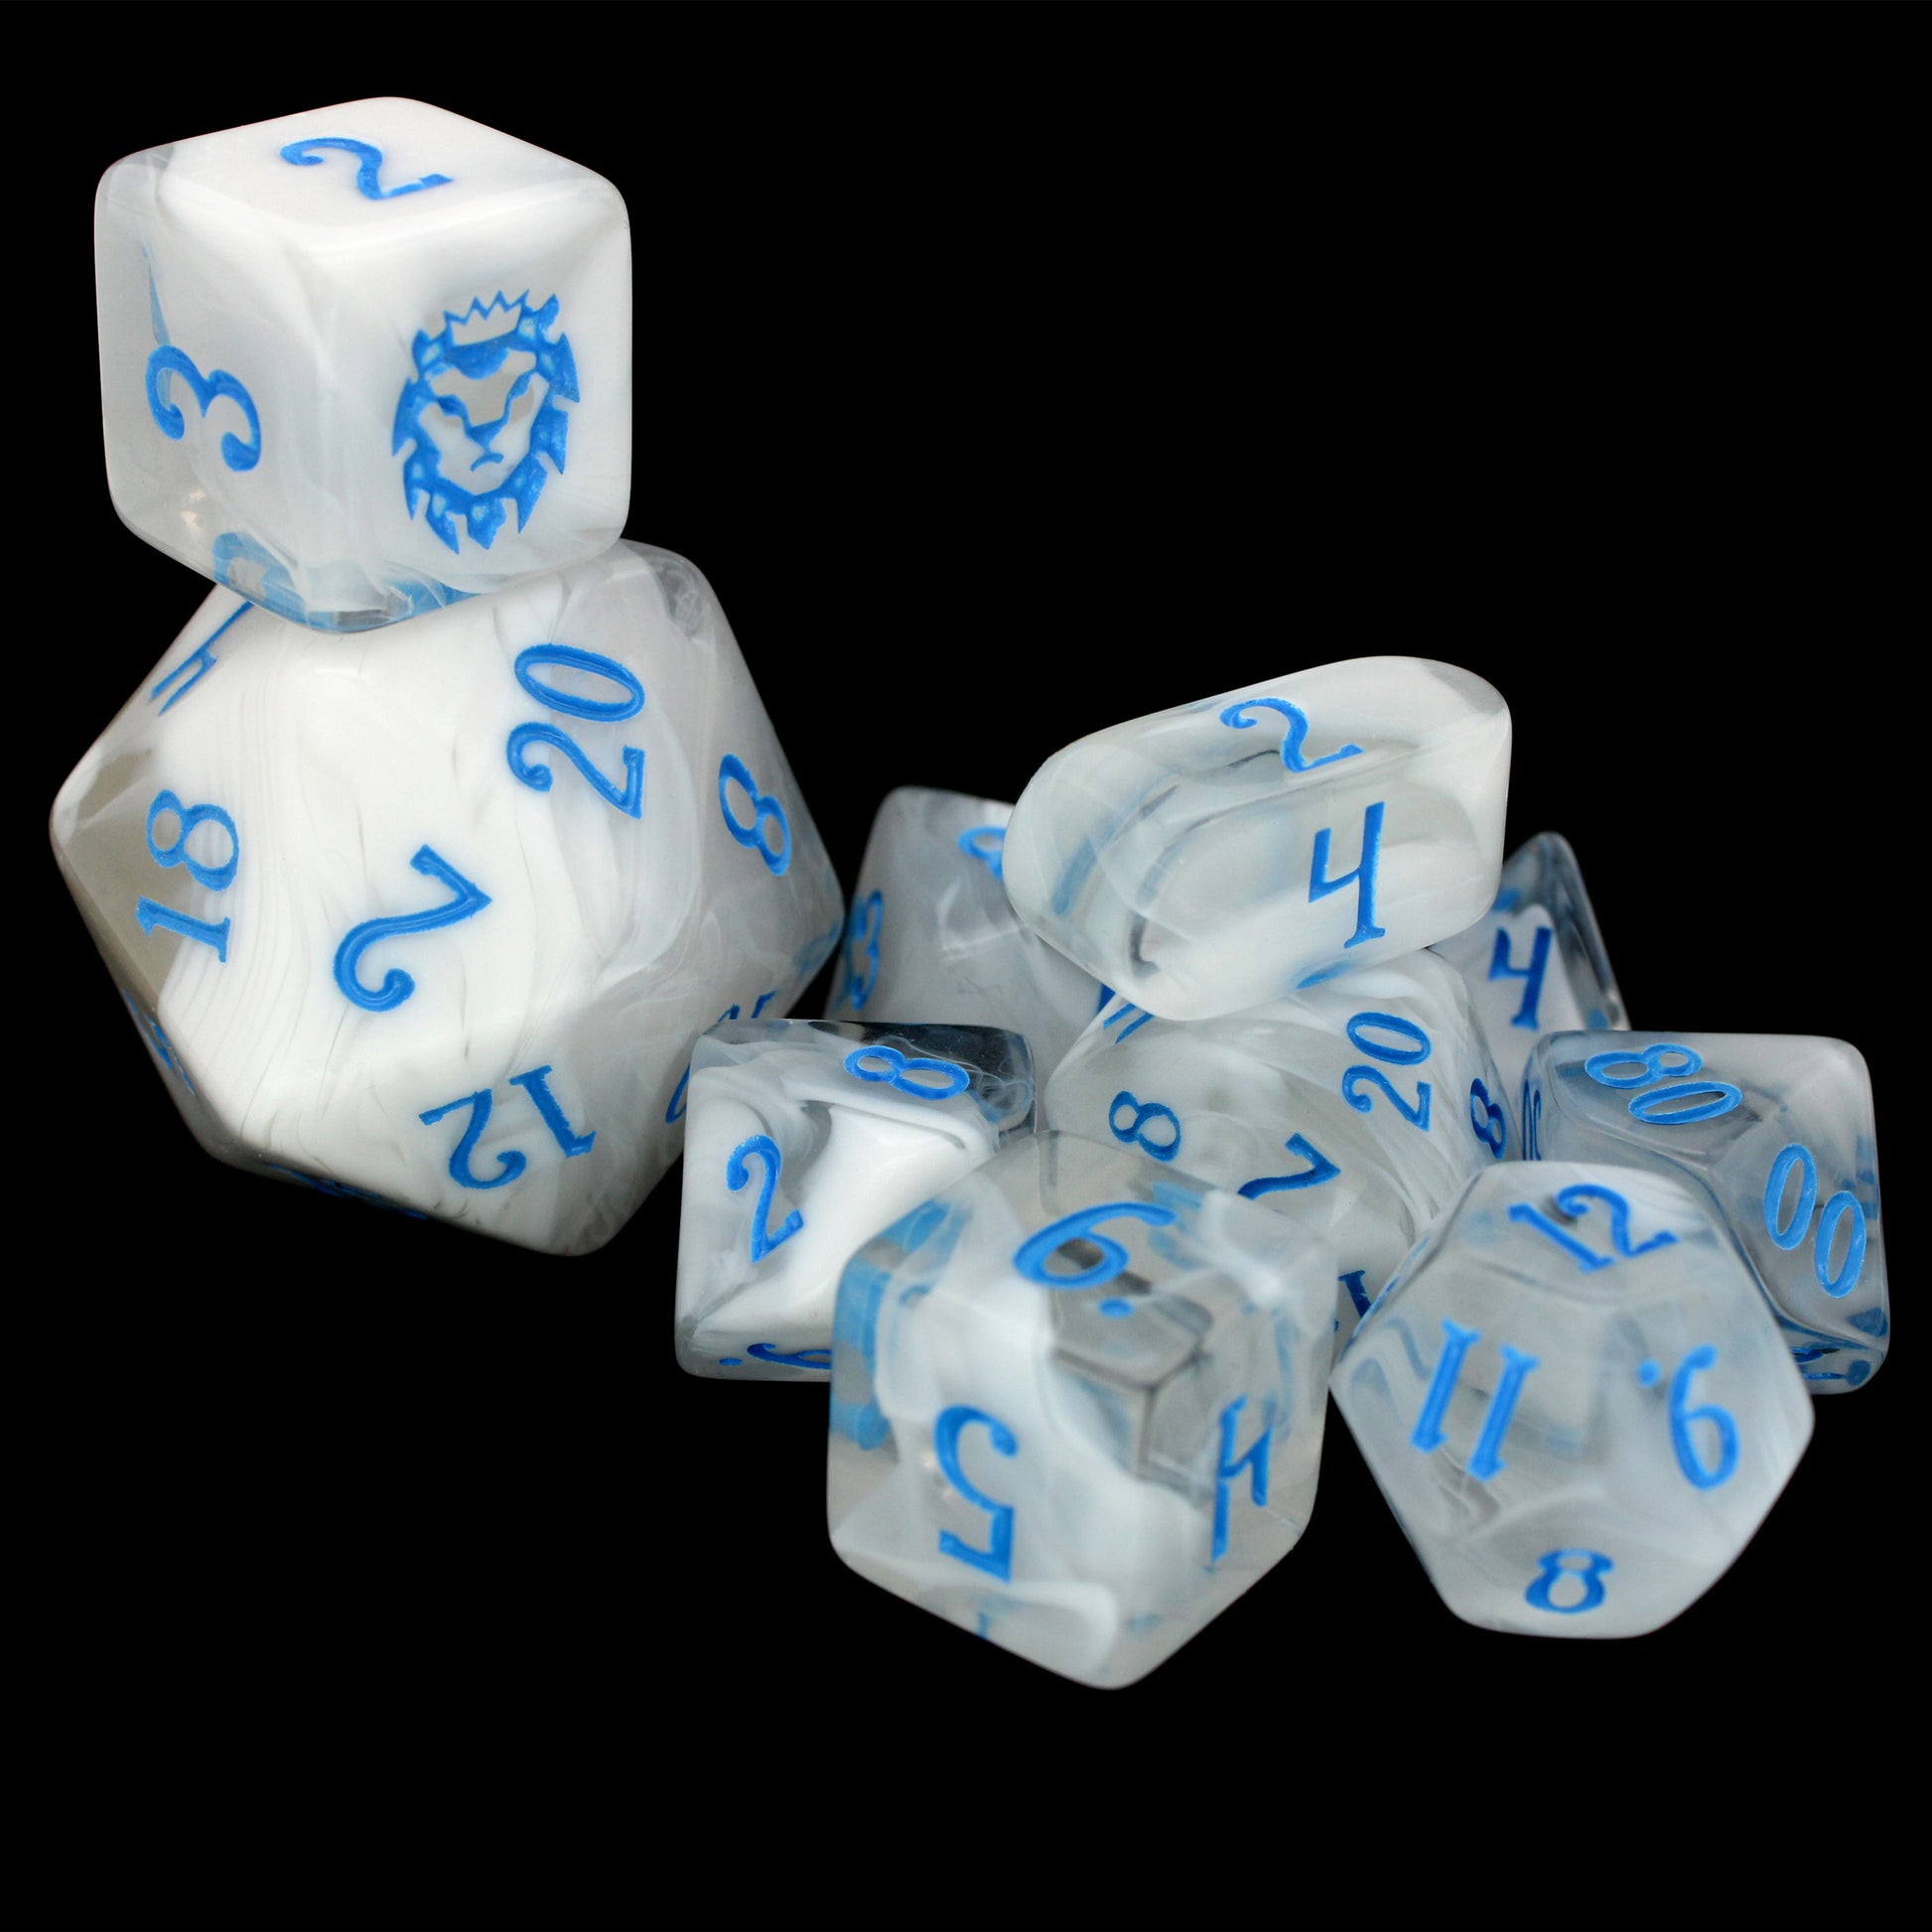 Snow Mercy is a 10-piece set of clear resin dice with swirls of frosty white, inked in blue.